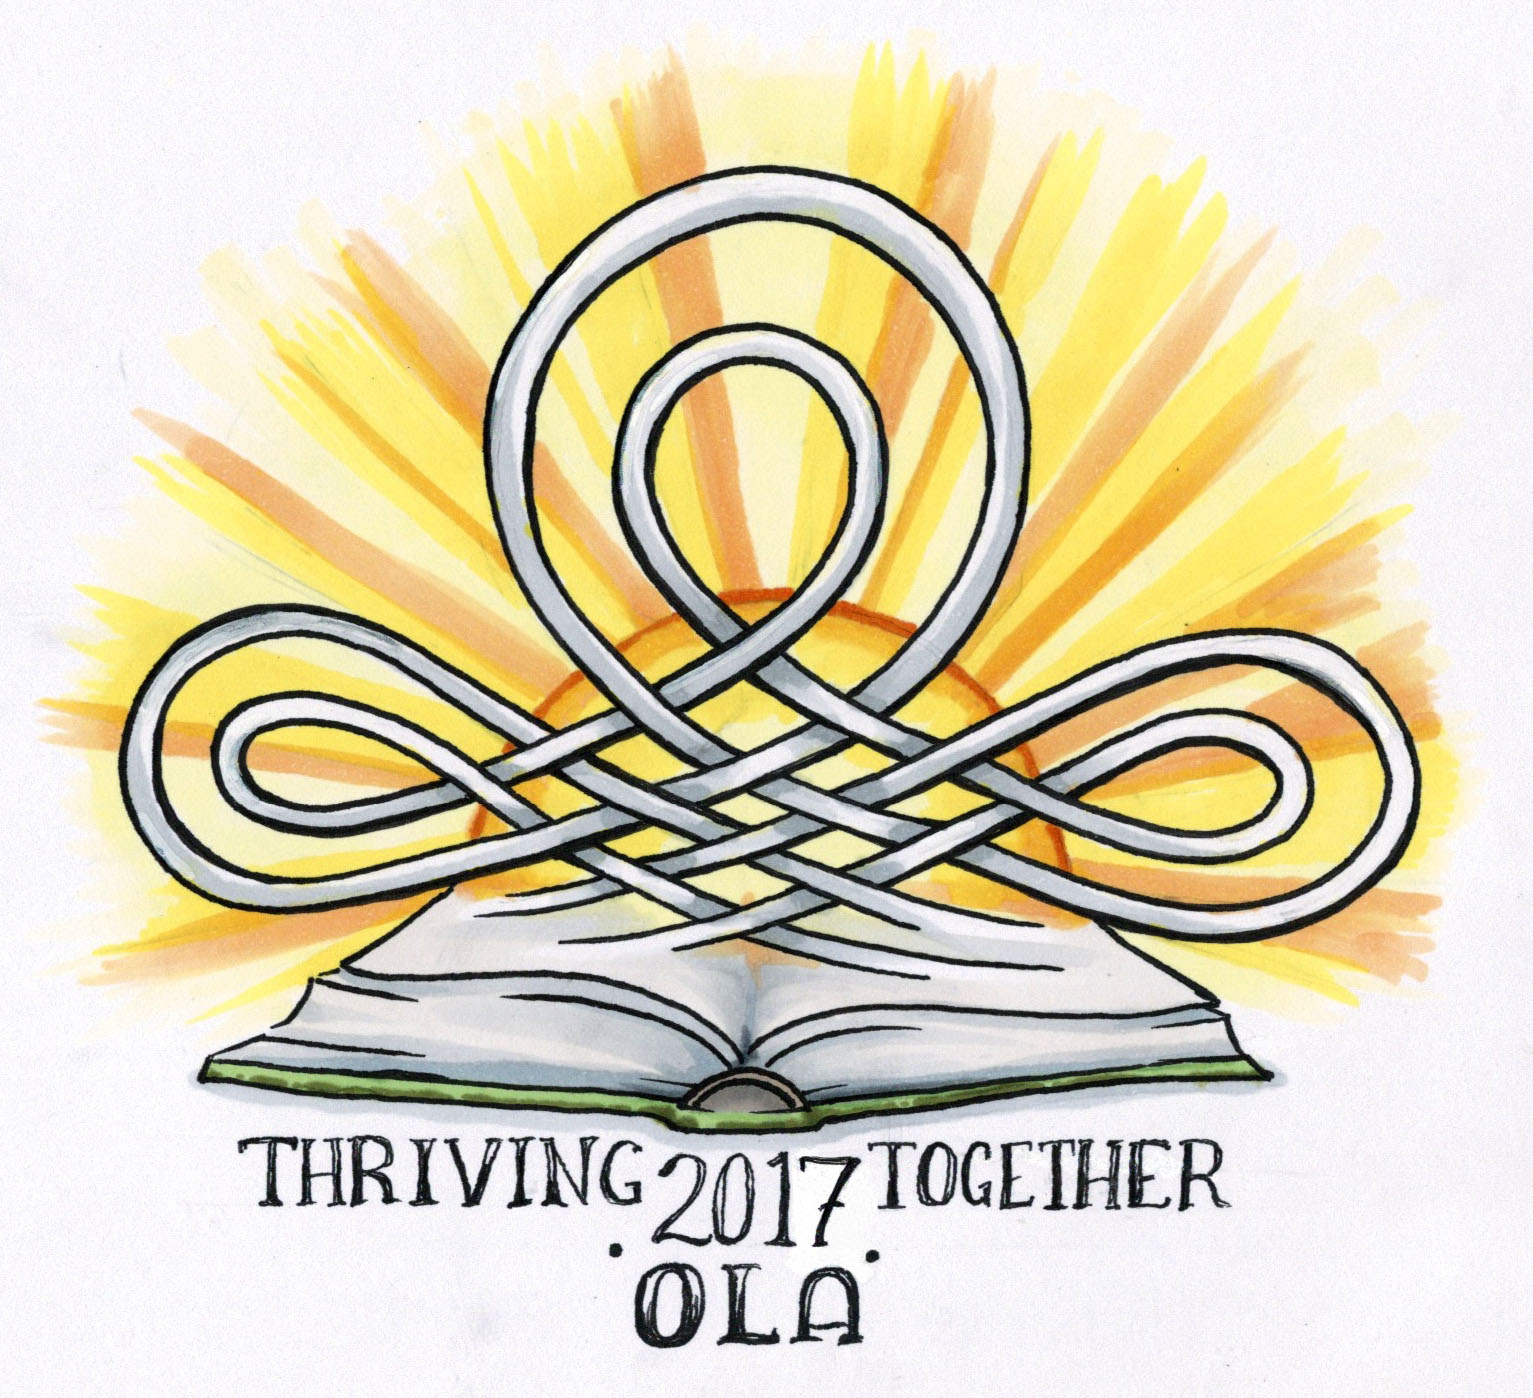 OLA 2107 Conference Logo - Thriving Together